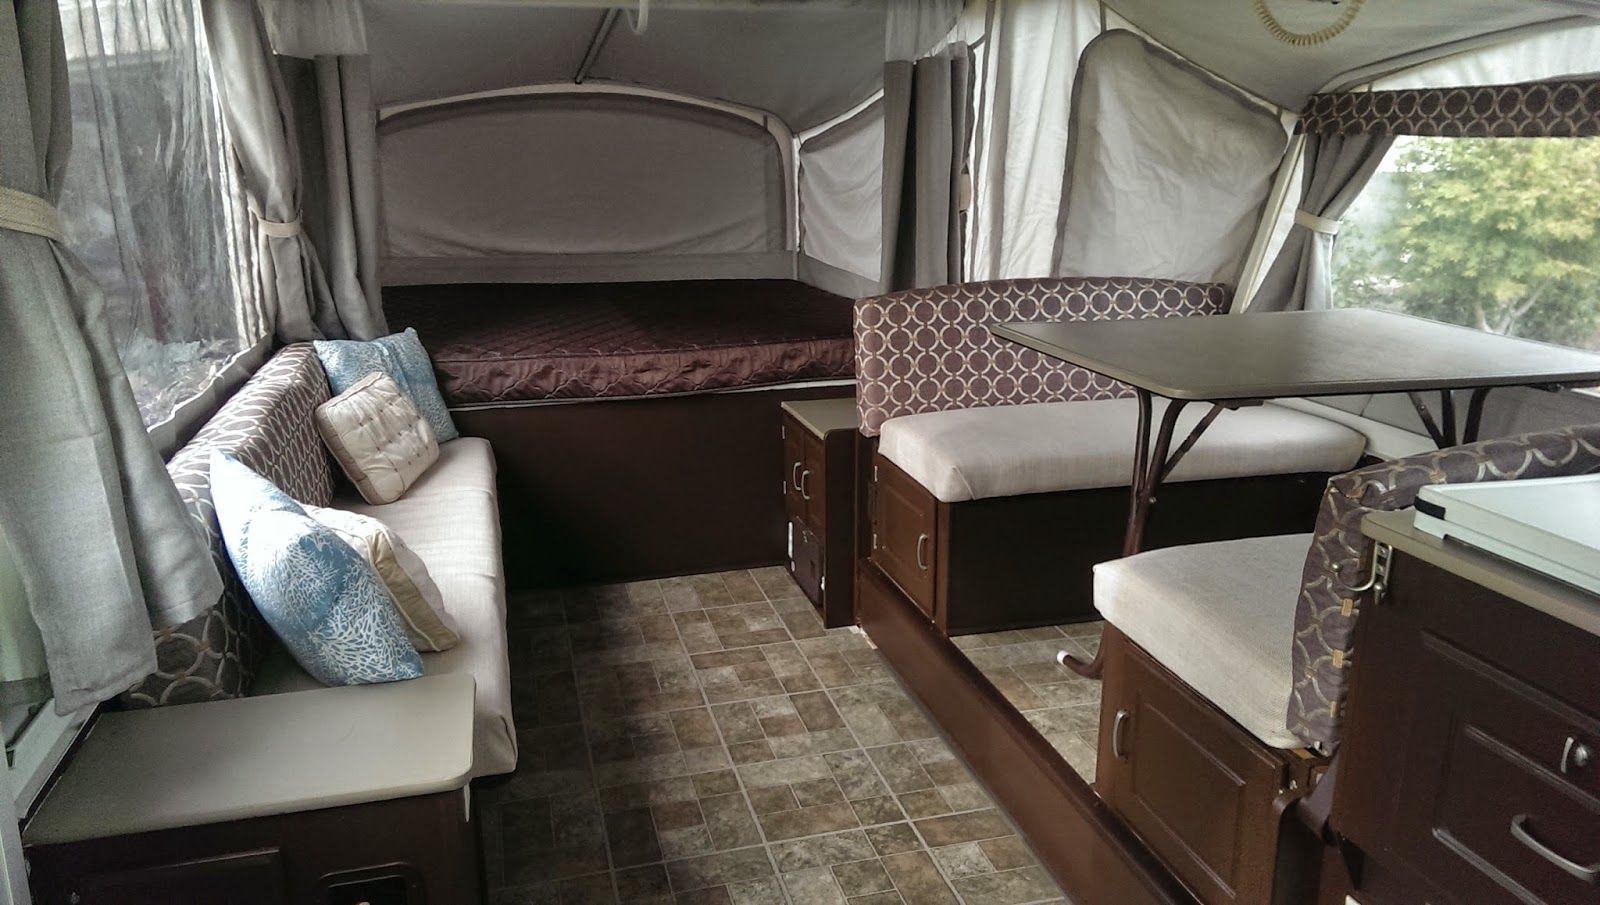 This is our one week pop-up camper remodel!